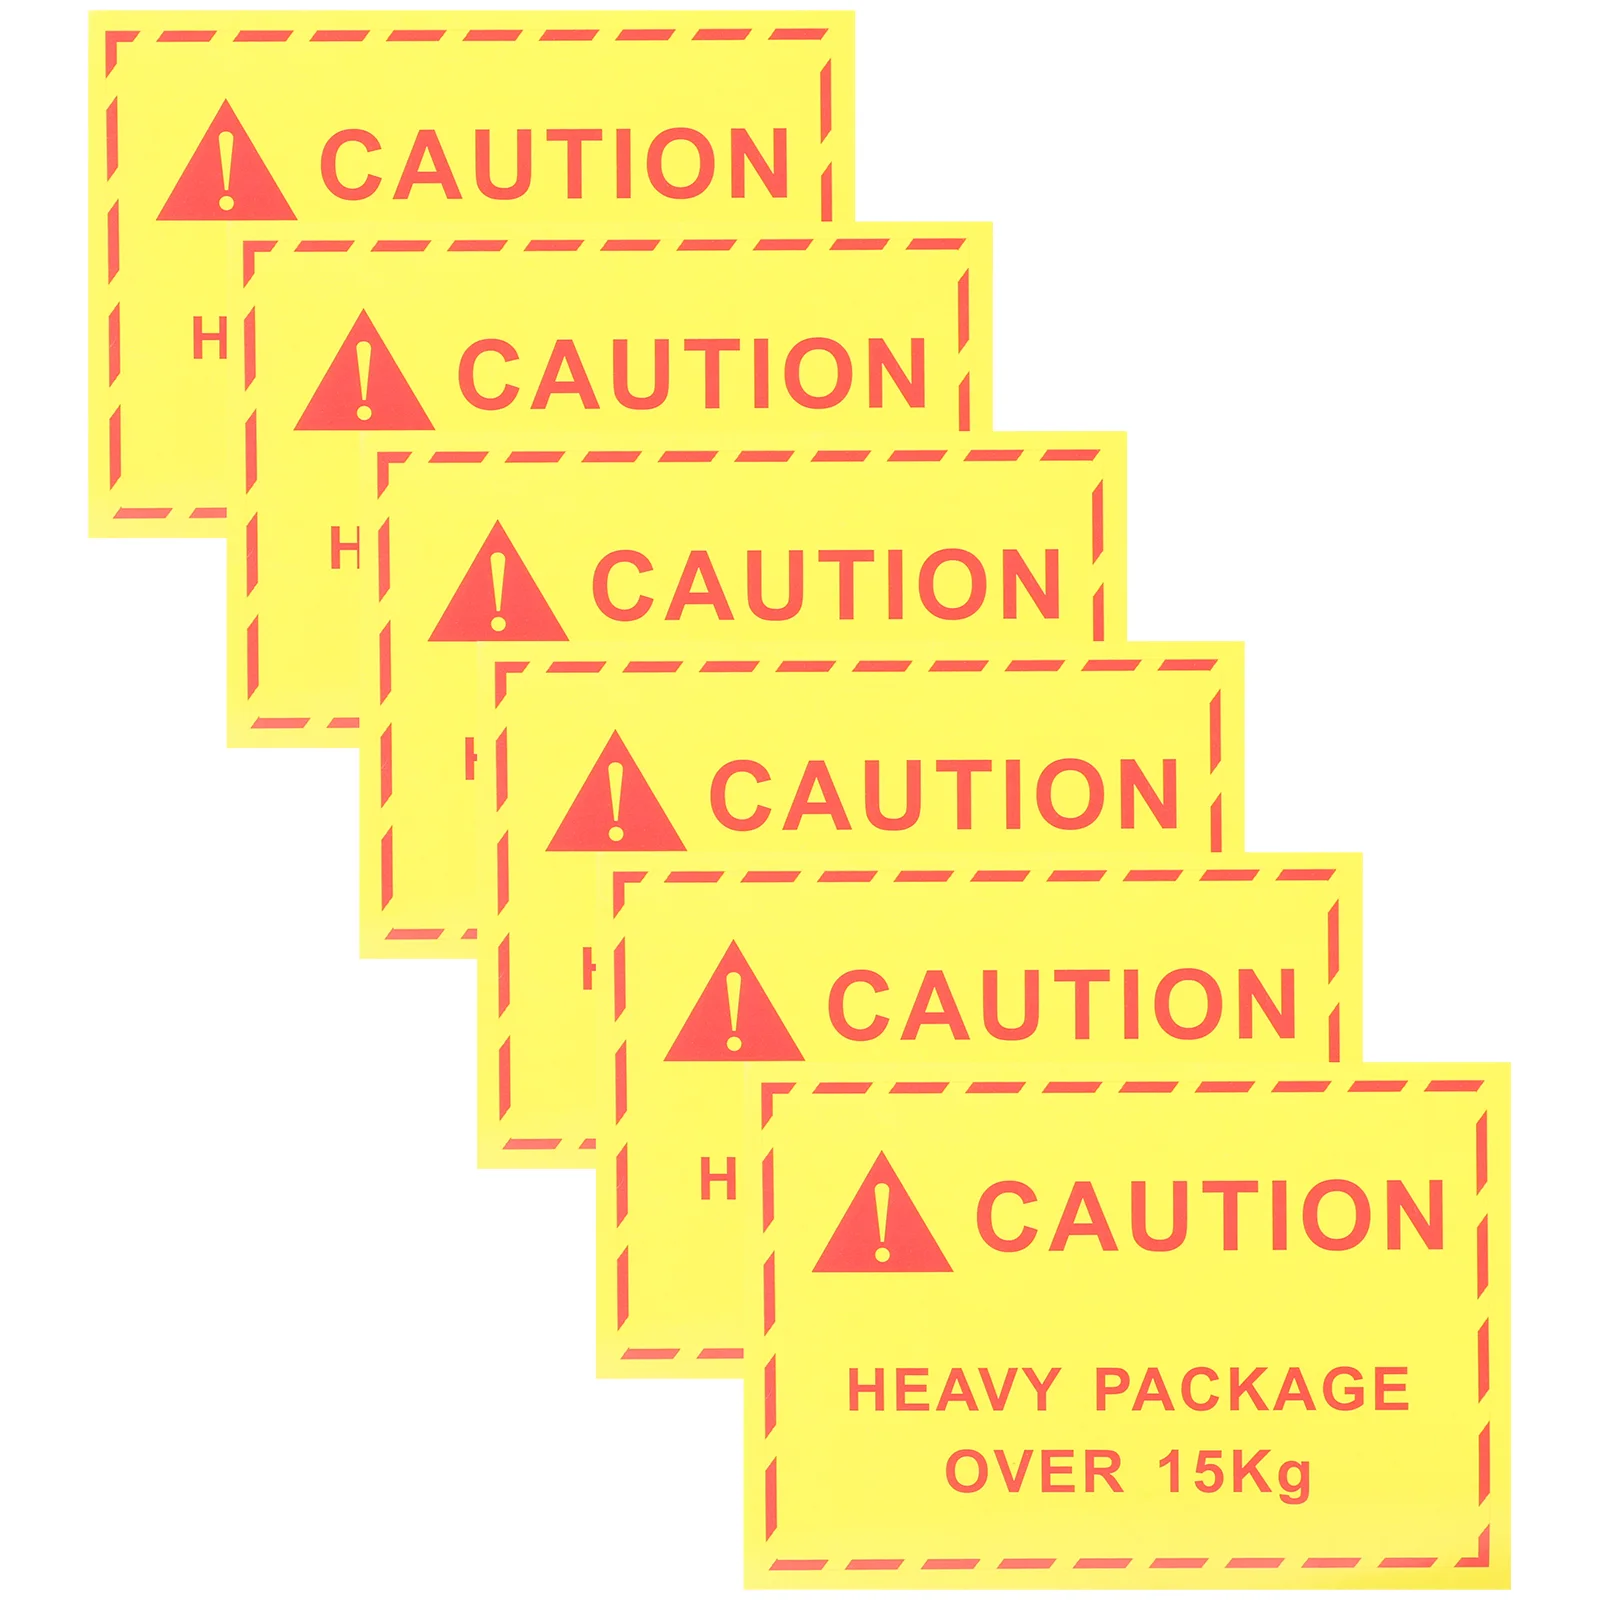 

Labels Stickers Caution Label Shipping Heavy Moving Warning Packing Sign Handling Pallet Box Sticker Fragile Do Not Touch Handle